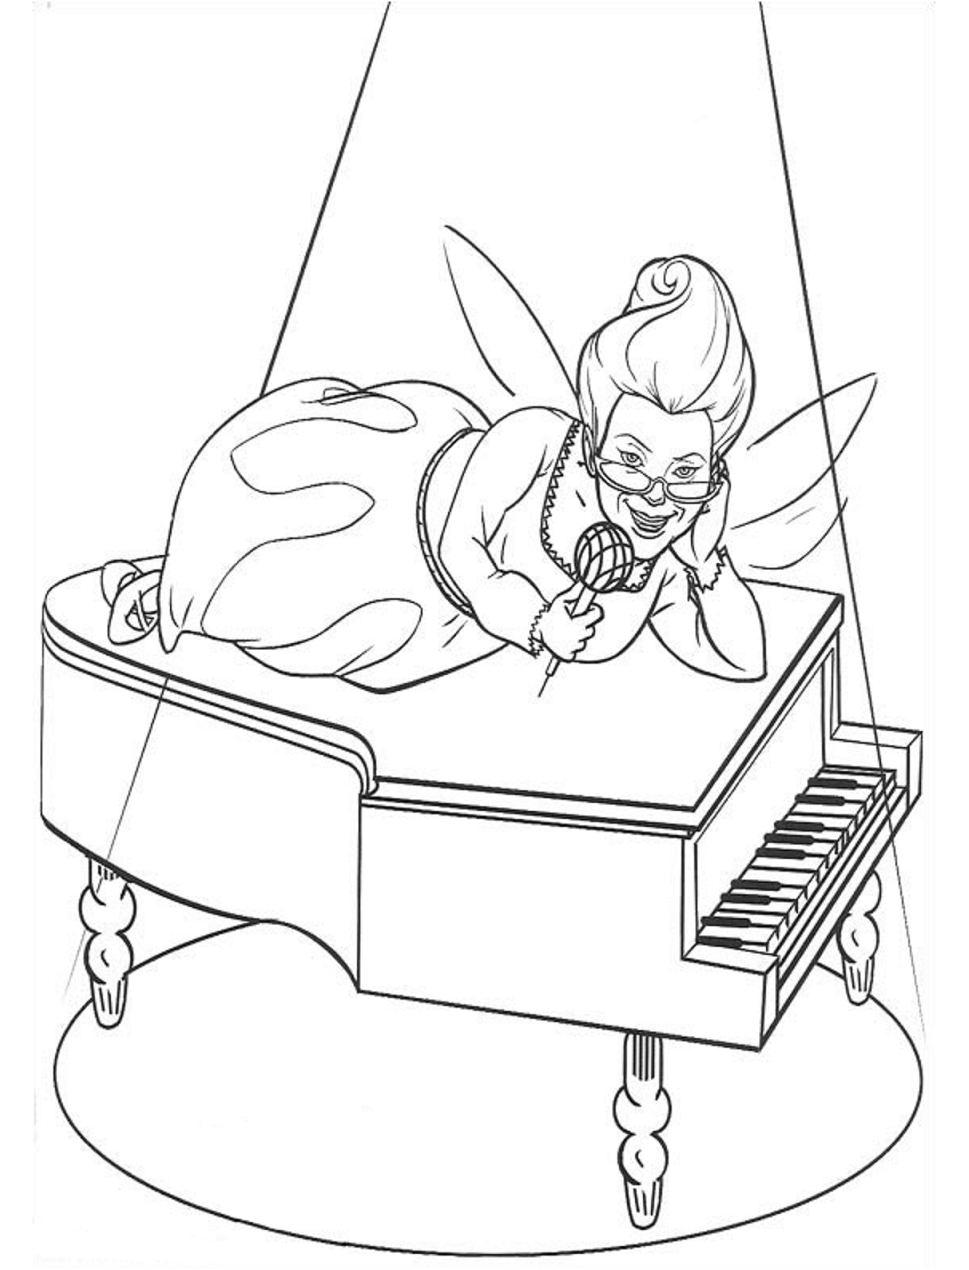 Fairy Godmother On Piano Coloring Page - Free Printable Coloring Pages